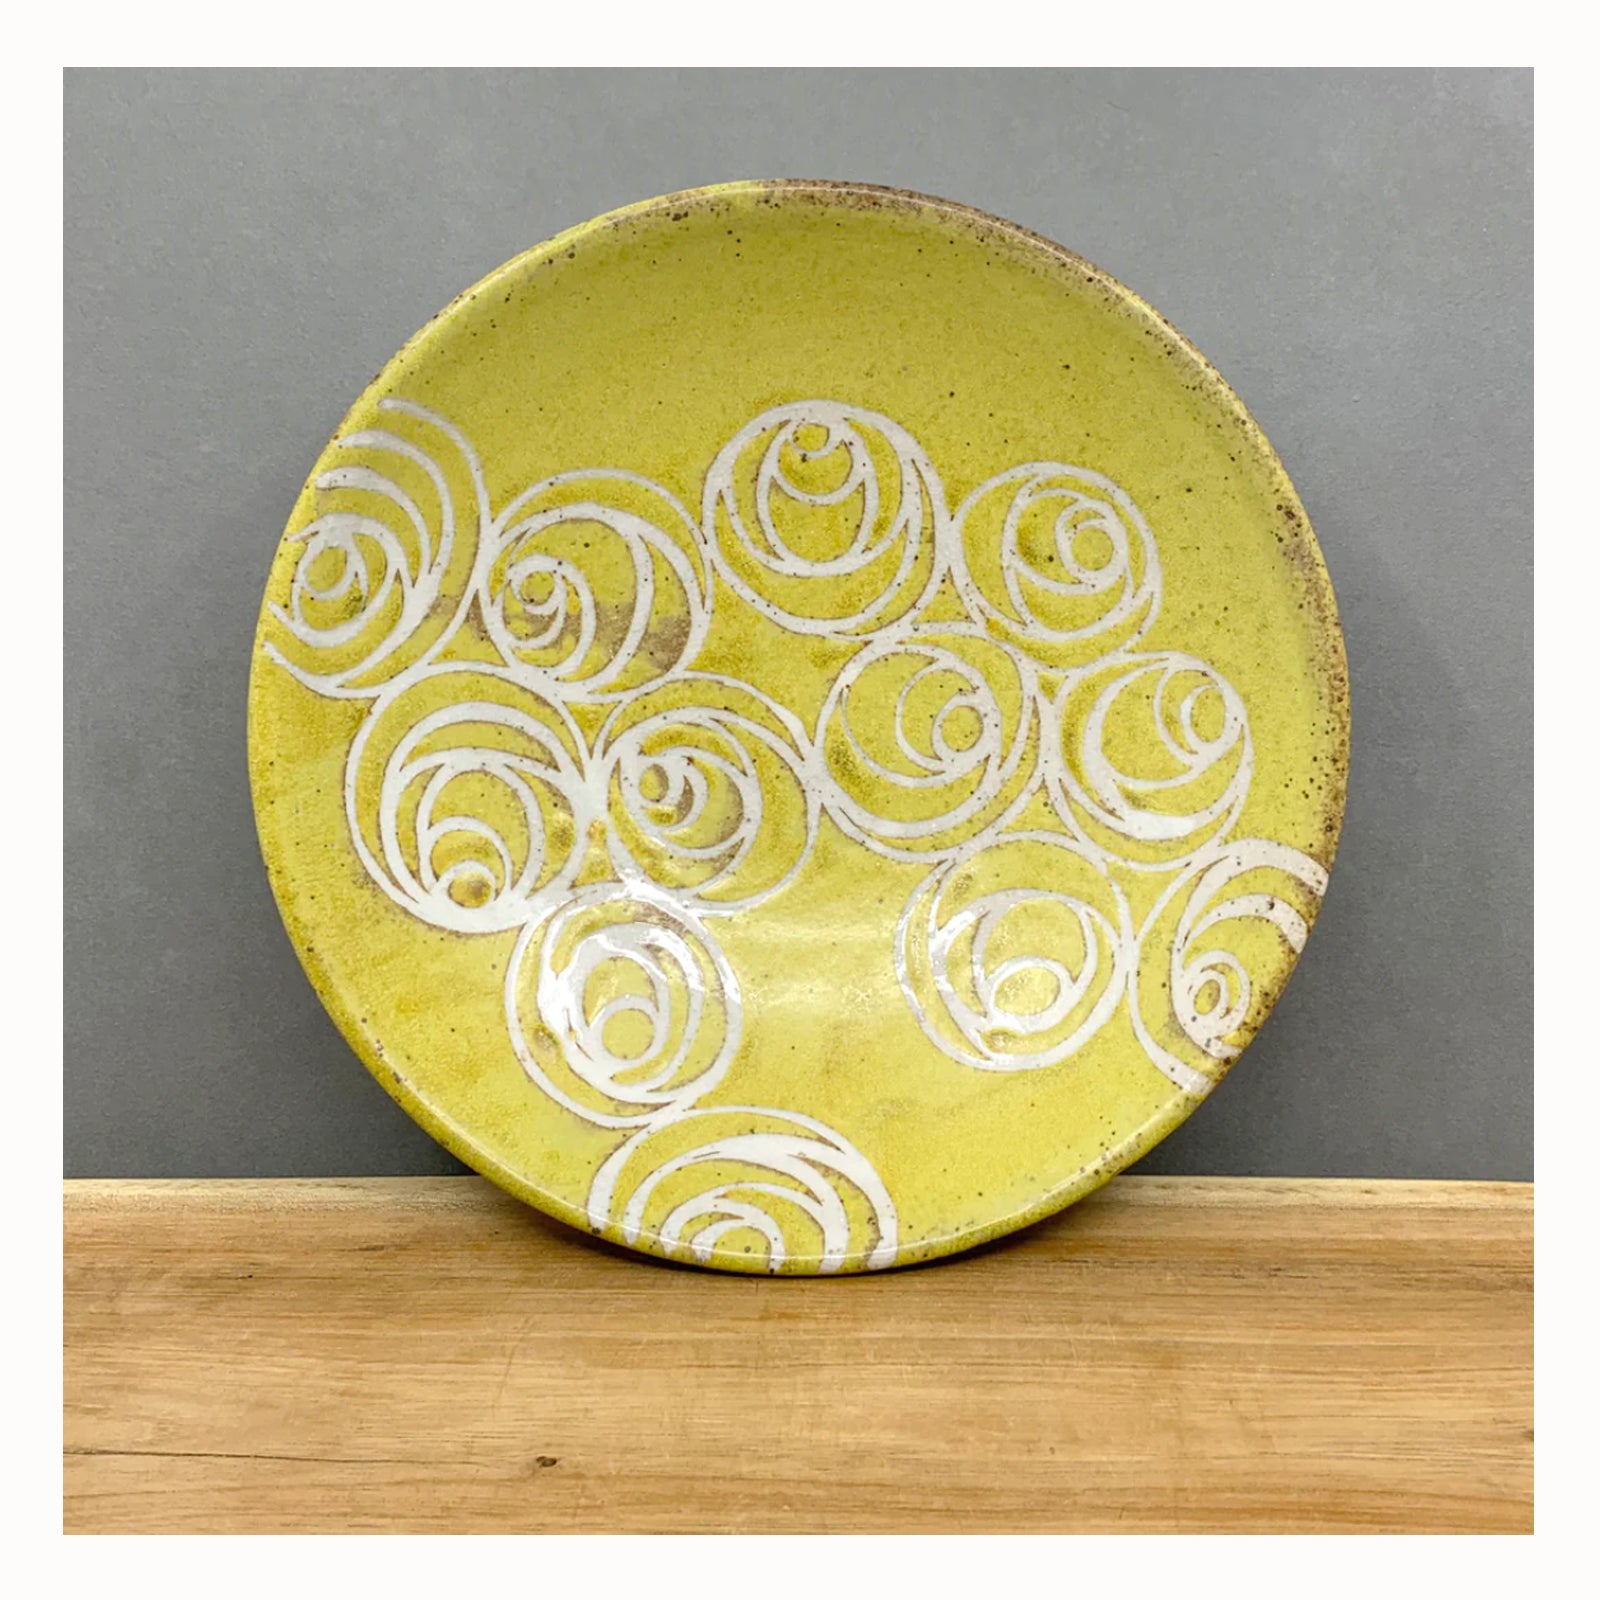 Julie Covington handmade ceramics at Lark & Key, Charlotte NC. Shop online or locally by appointment. NC pottery.